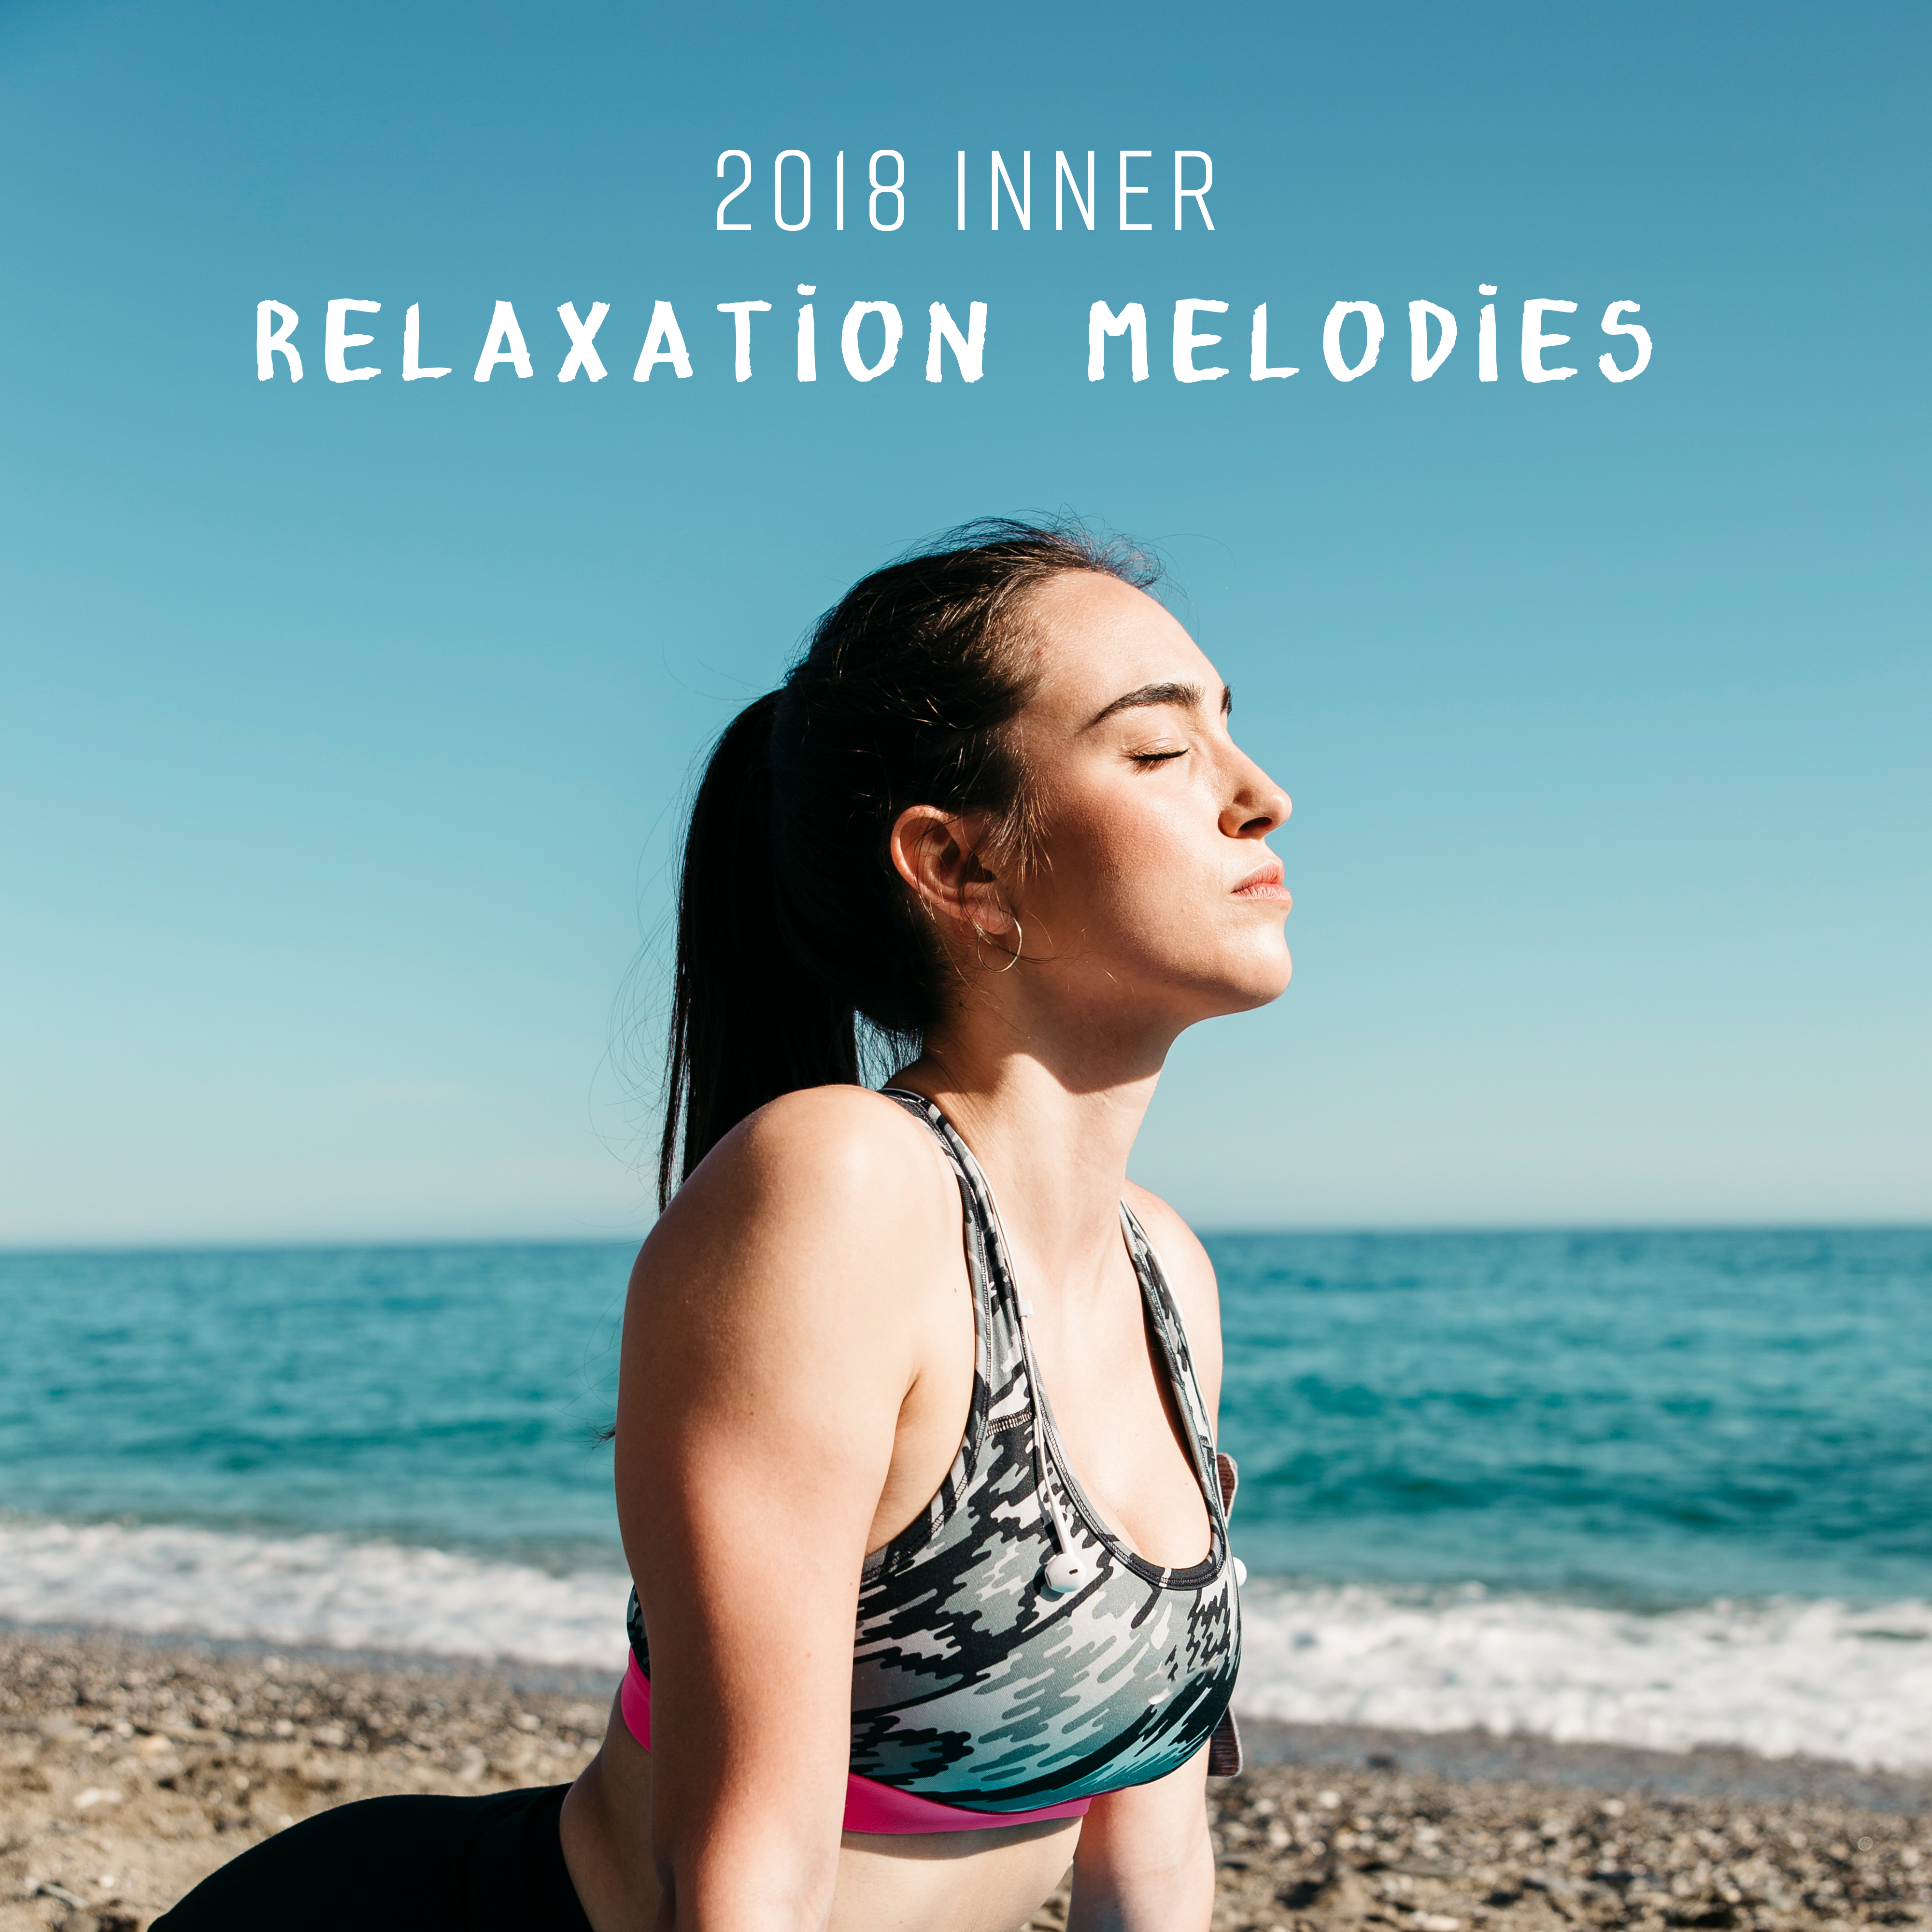 2018 Inner Relaxation Melodies